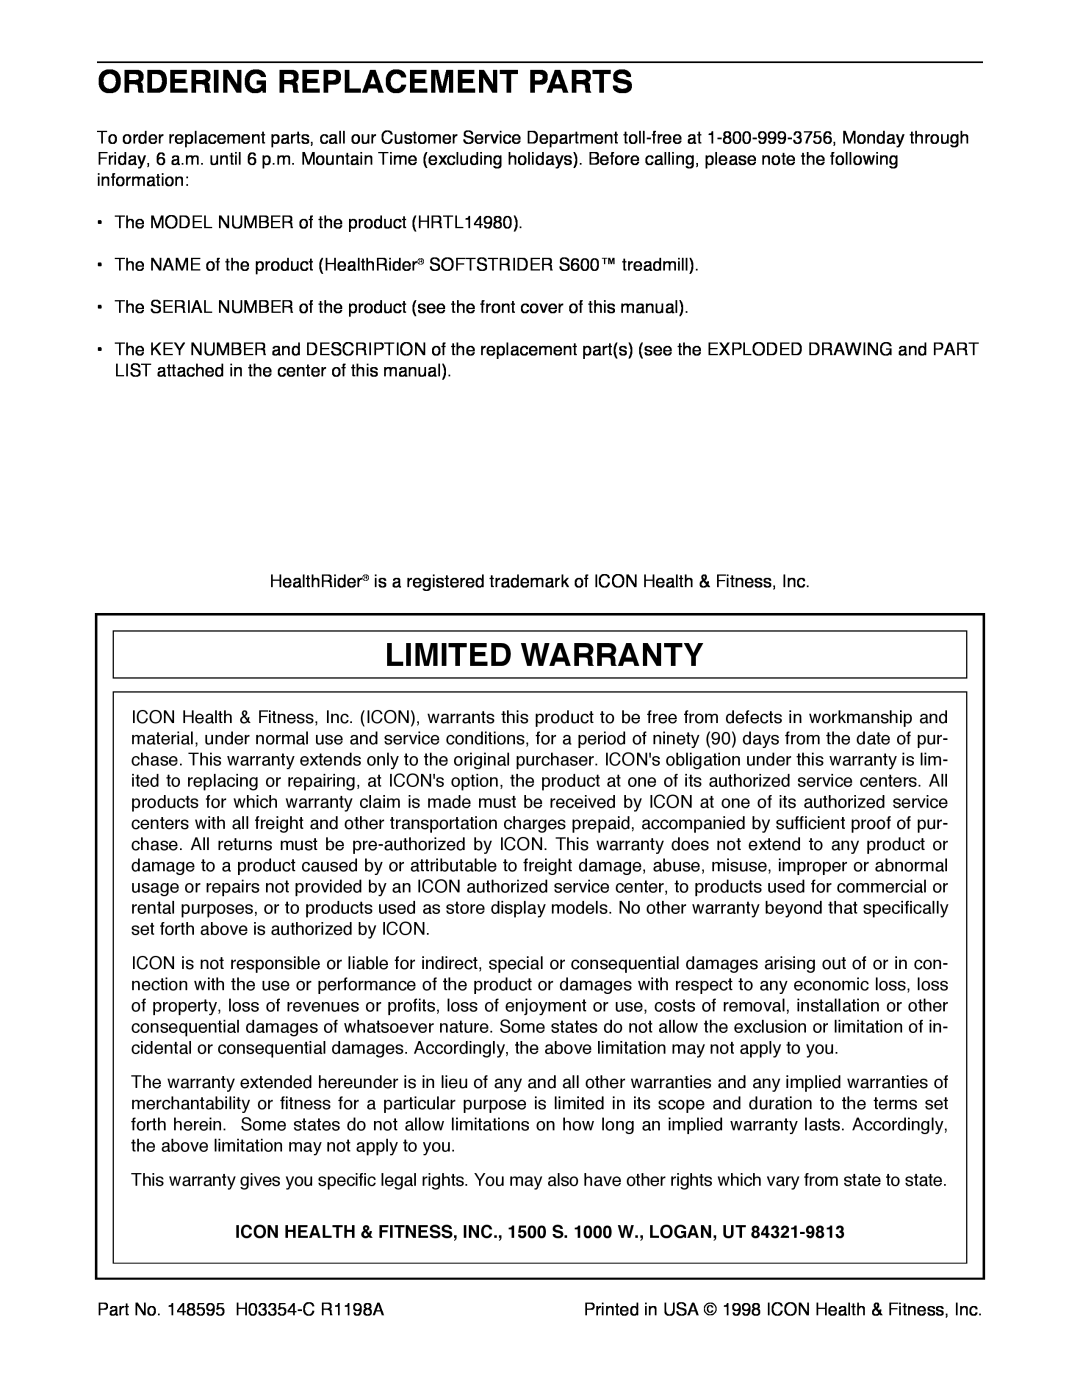 Healthrider HRTL14980 manual Ordering Replacement Parts, Limited Warranty 